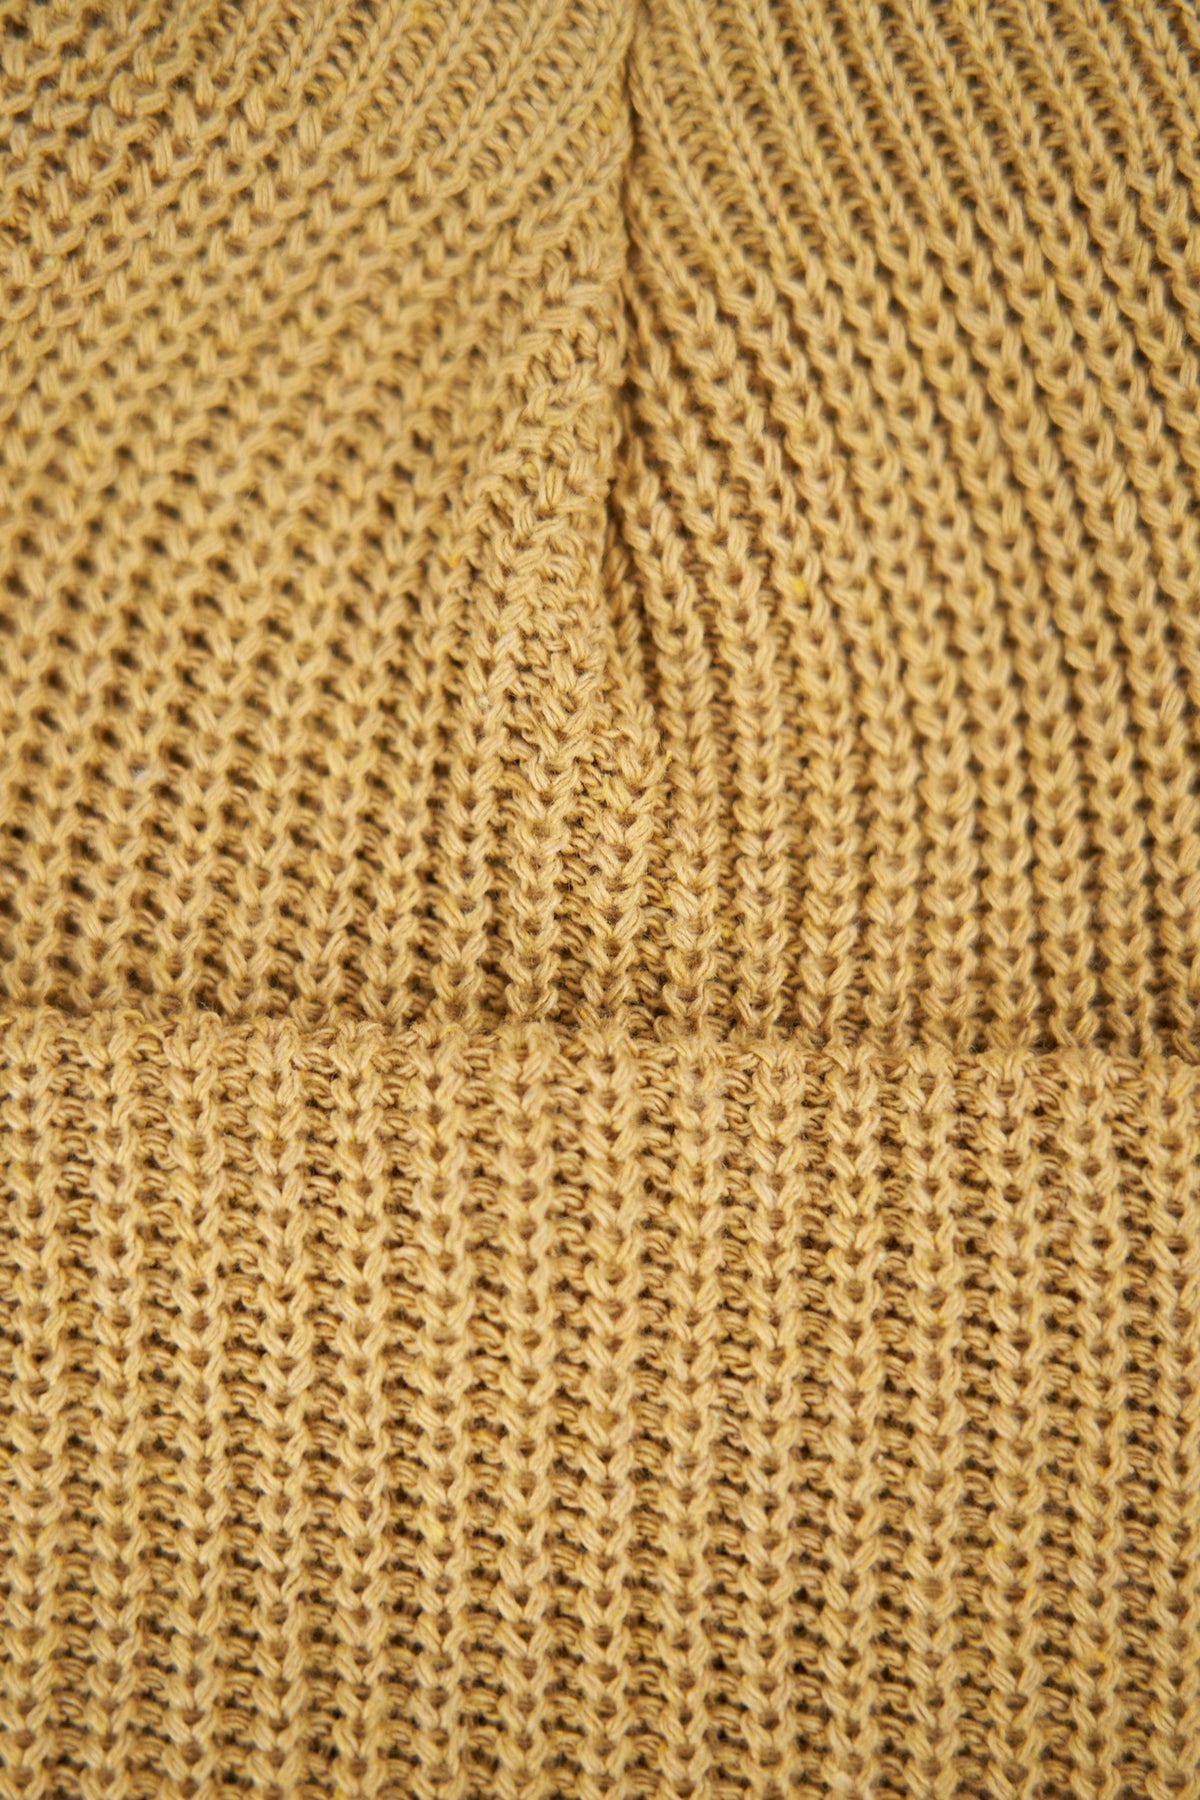 Straw Upcycled Cotton Watchcap